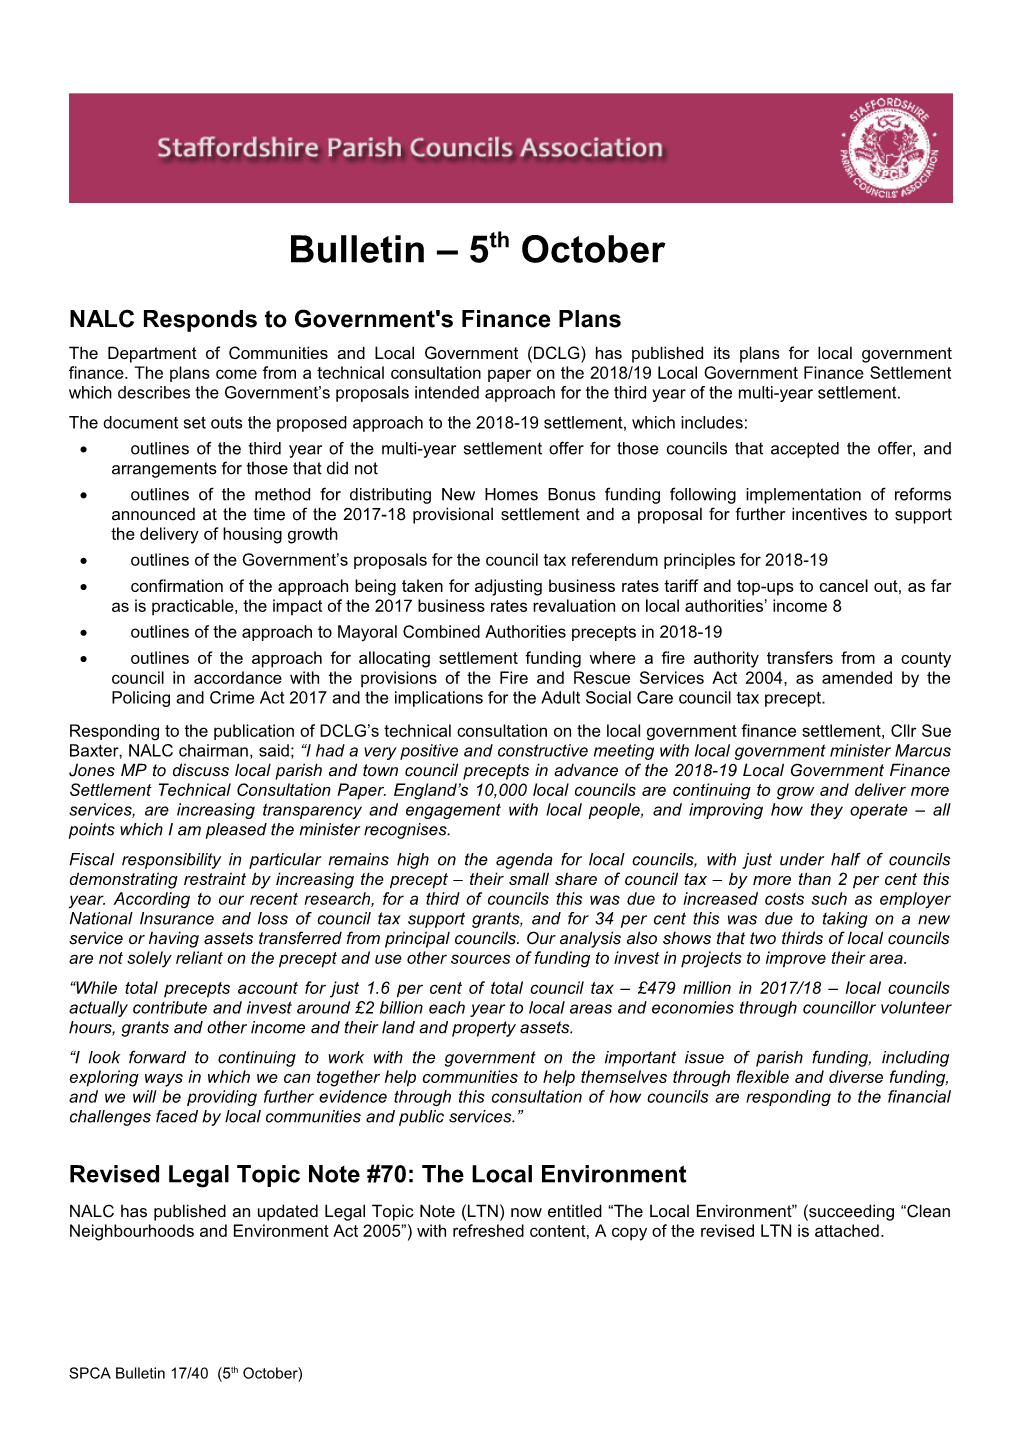 NALC Responds to Government's Finance Plans